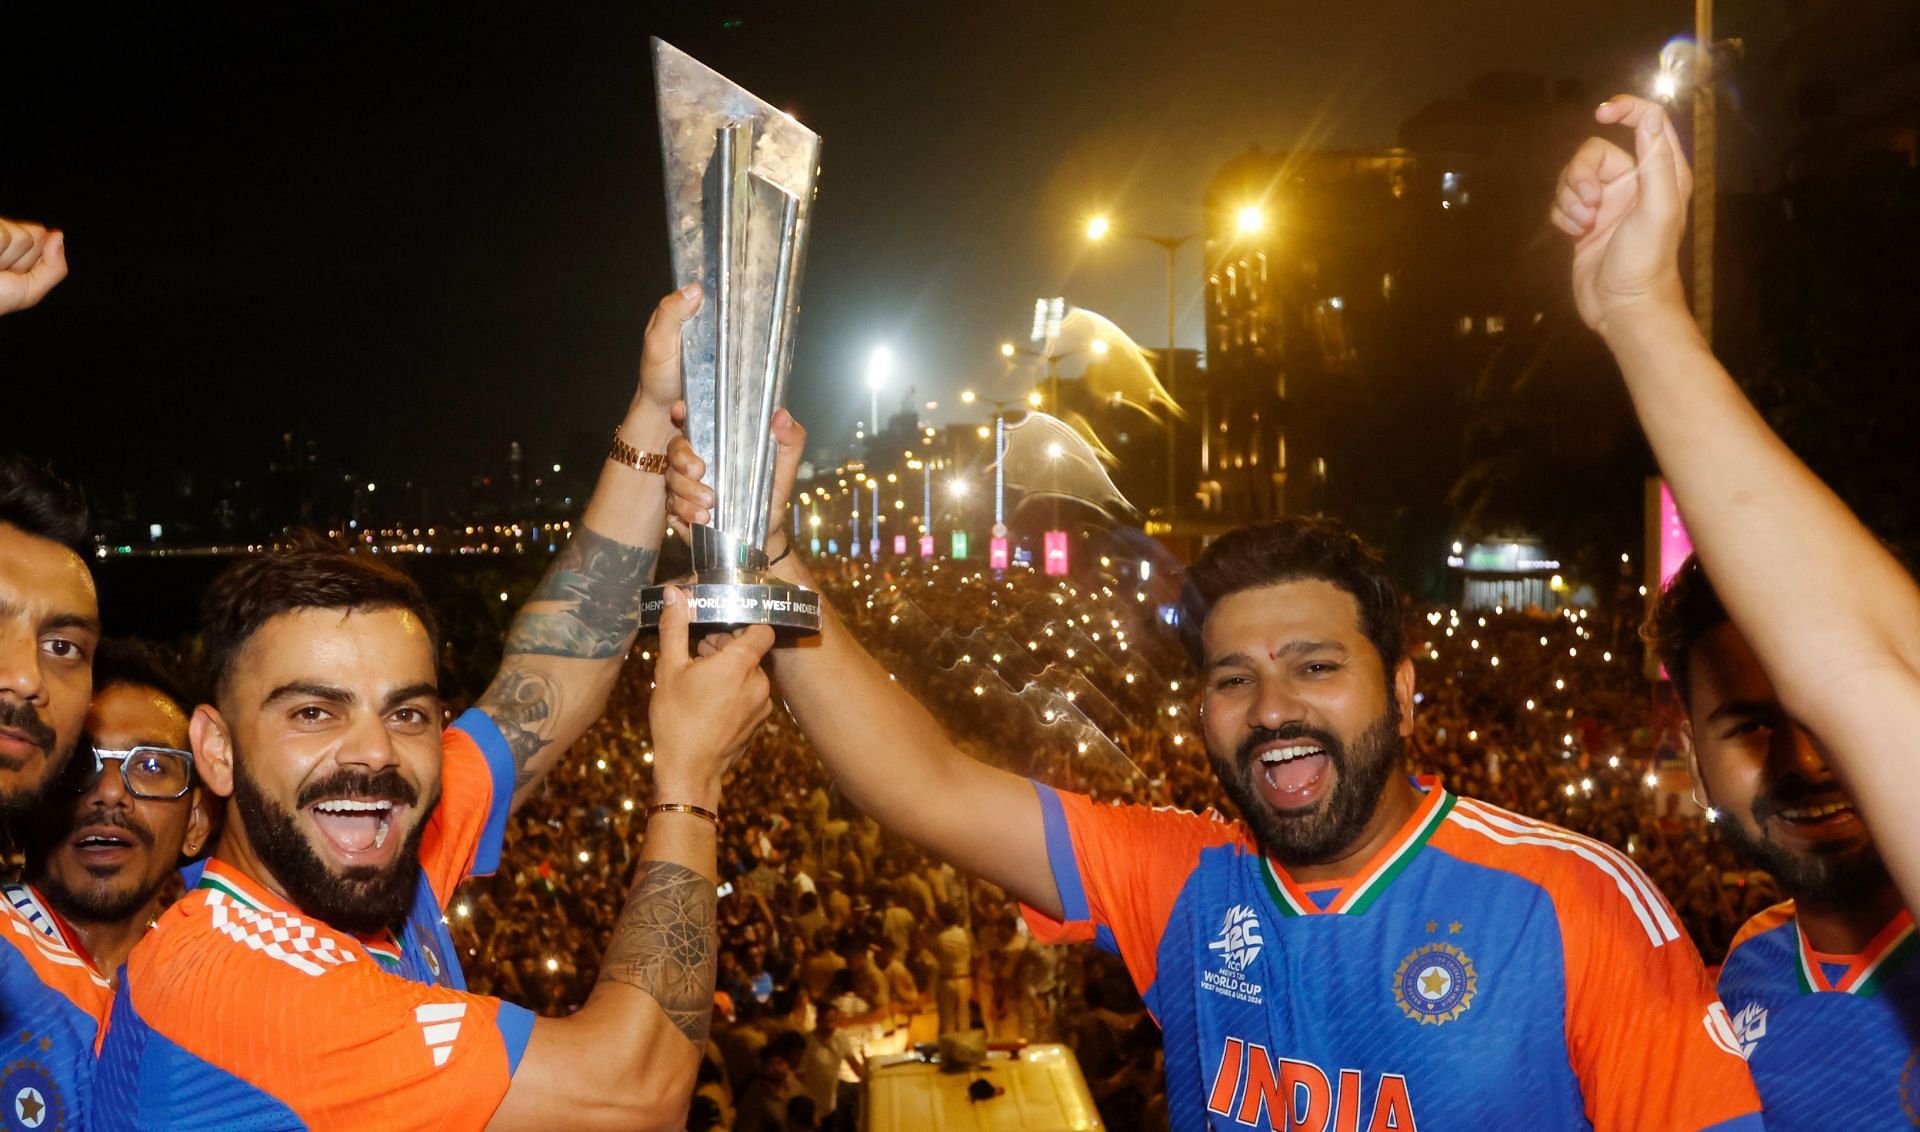 [Watch] Fan screams Virat Kohli's name from a tree during victory parade; cricketer reacts